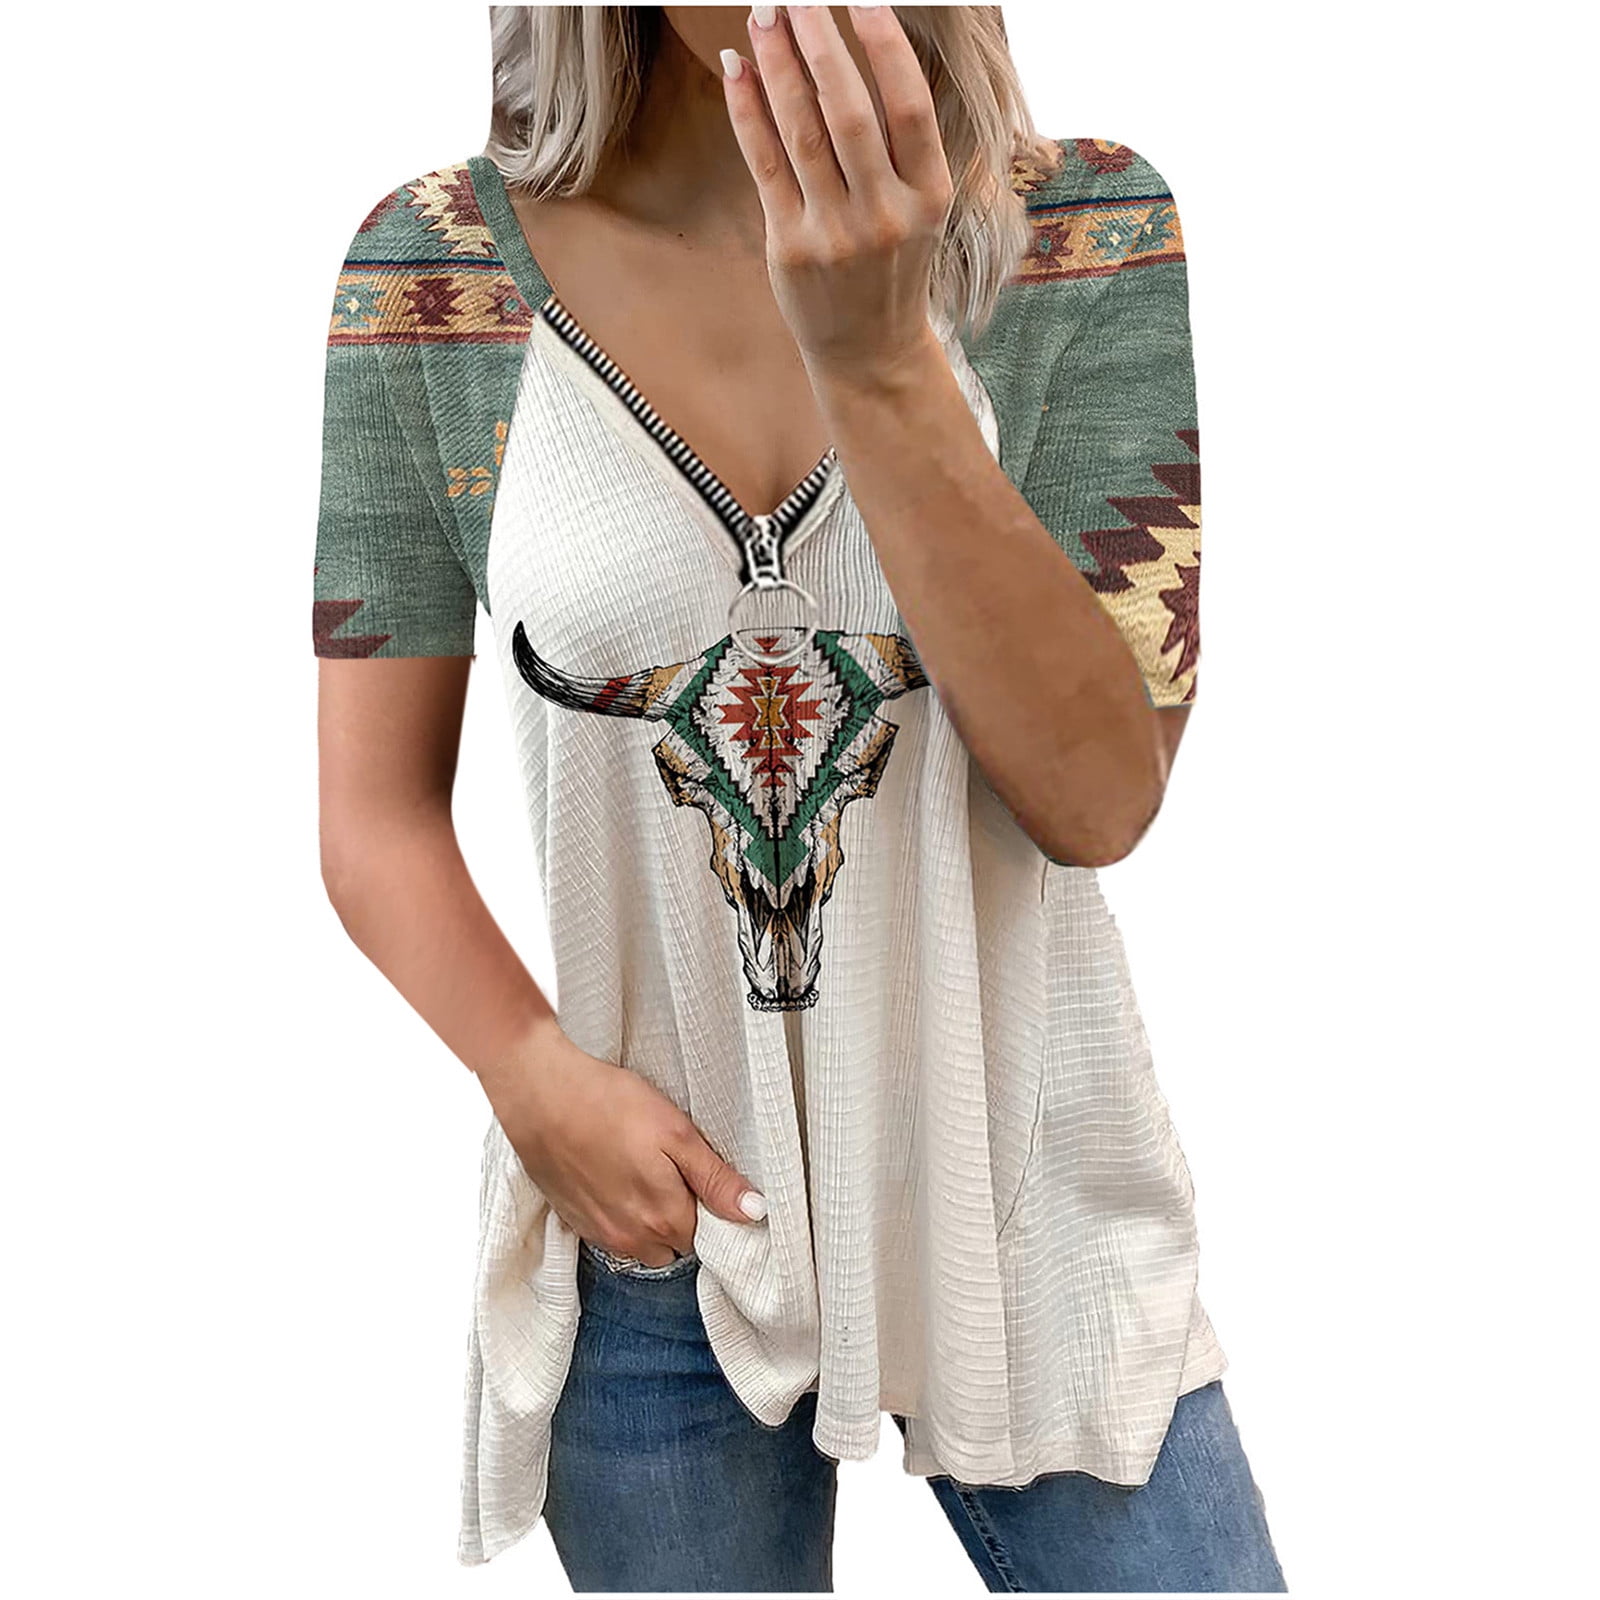 Women Tops T-Shirts Geometric Pattern Printed Zipper V Neck Cold Shoulder Short Sleeve Pullover Blouse Tees 